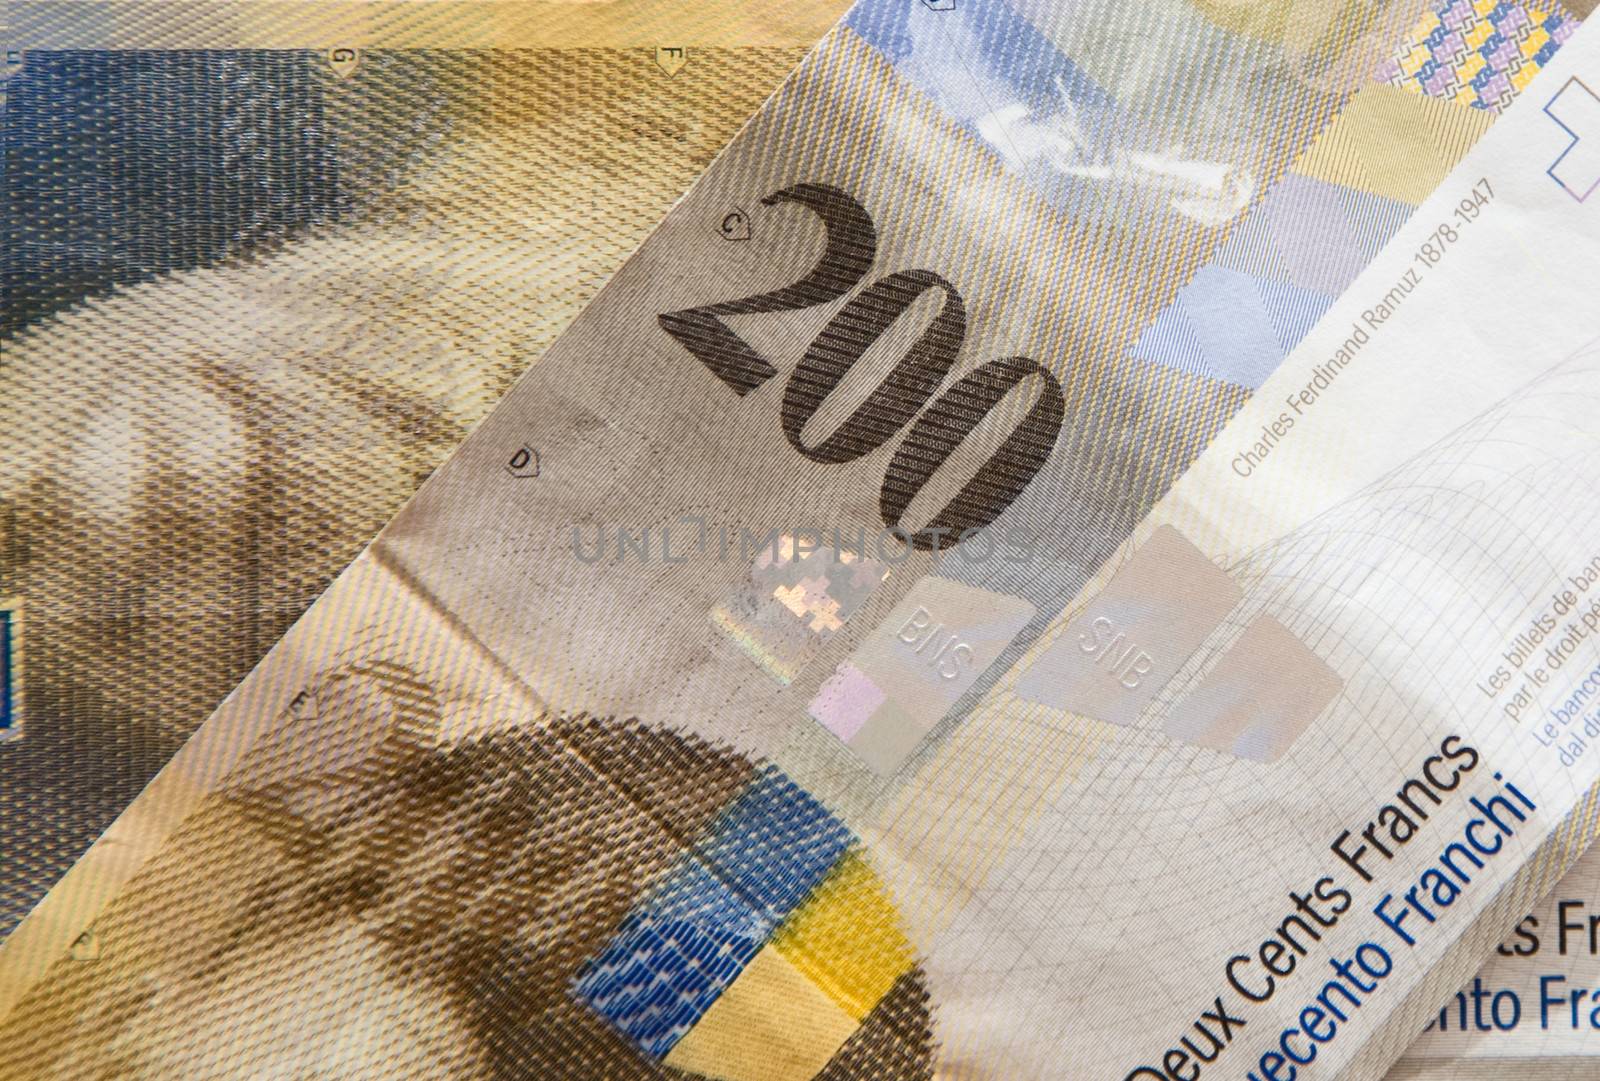 Swiss francs. Money and bank notes in Switzerland 